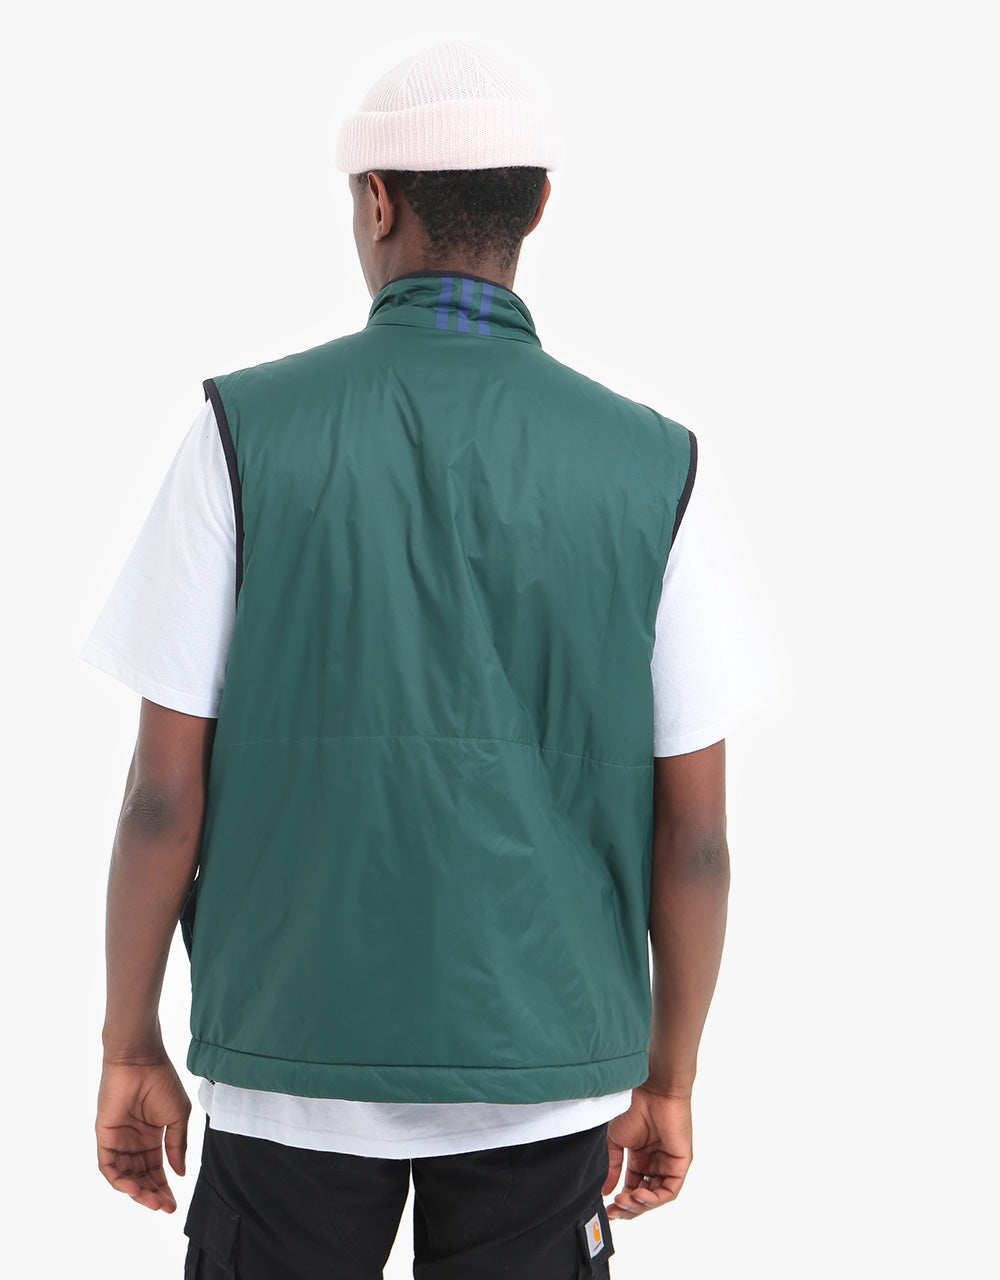 adidas Meade Pro Vest - Mystery Ink/Mineral Green